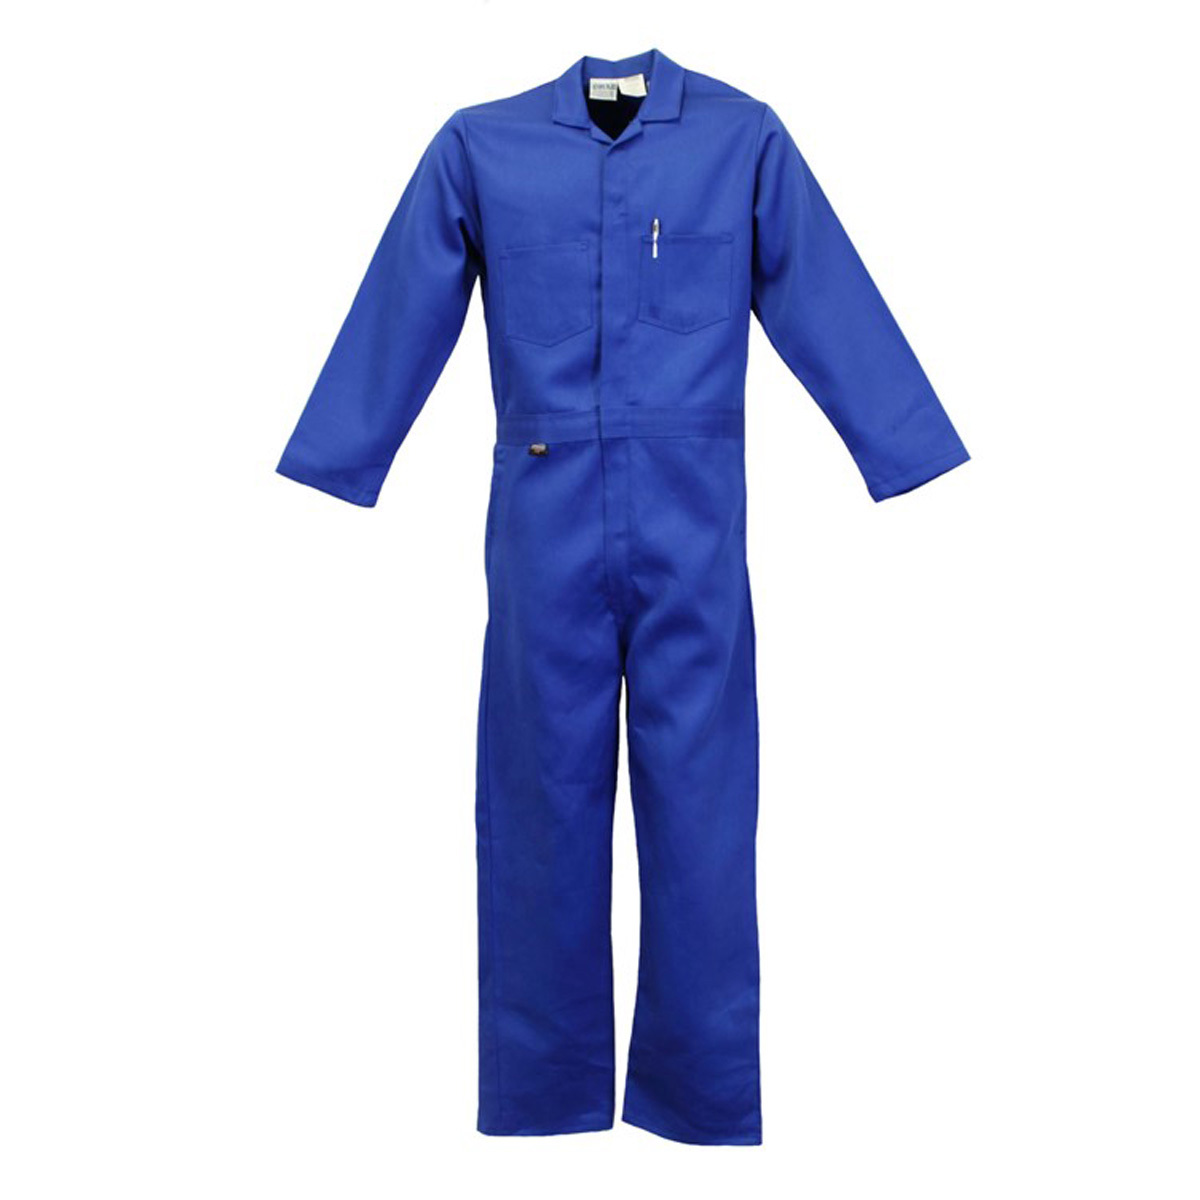 Stanco Safety Products™ Size 2X Tall Royal Blue Indura® Arc Rated Flame Resistant Coveralls With Front Zipper Closure